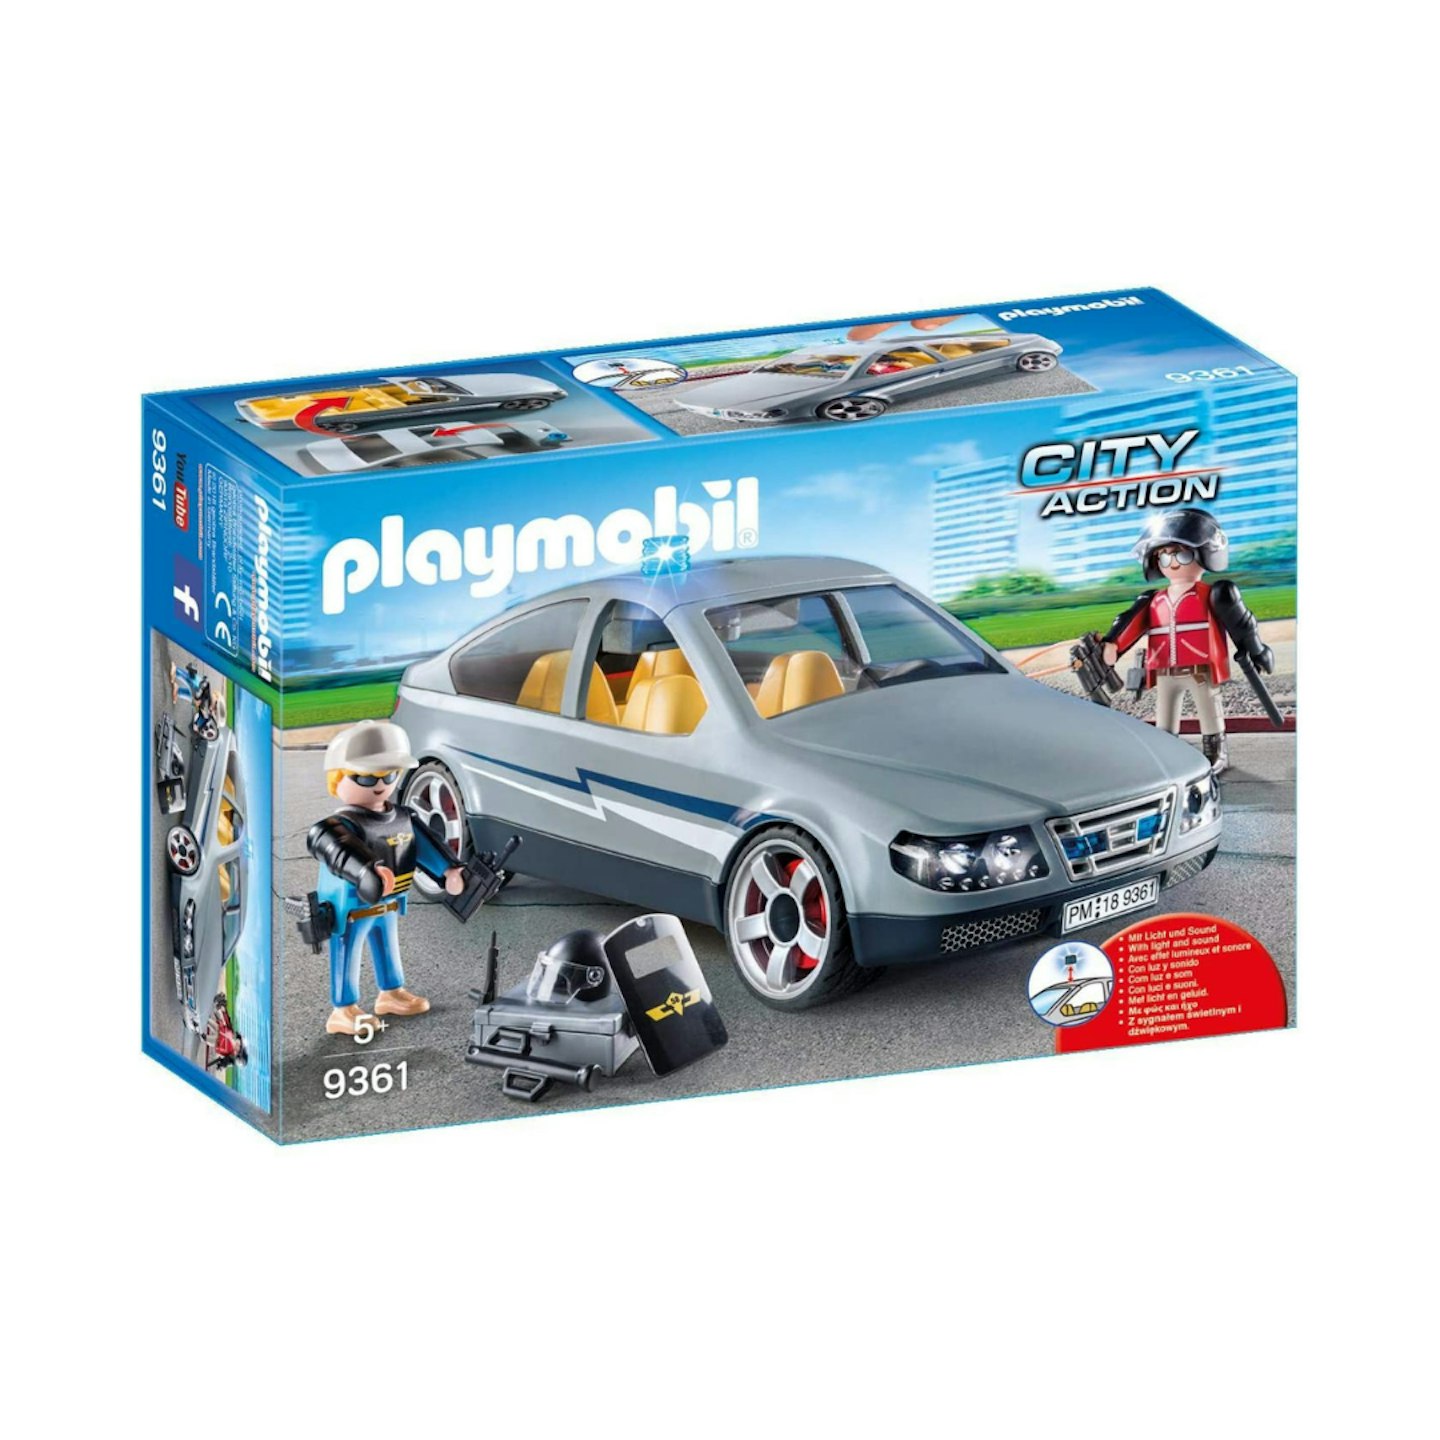 Playmobil 9361 City Action SWAT Undercover Car